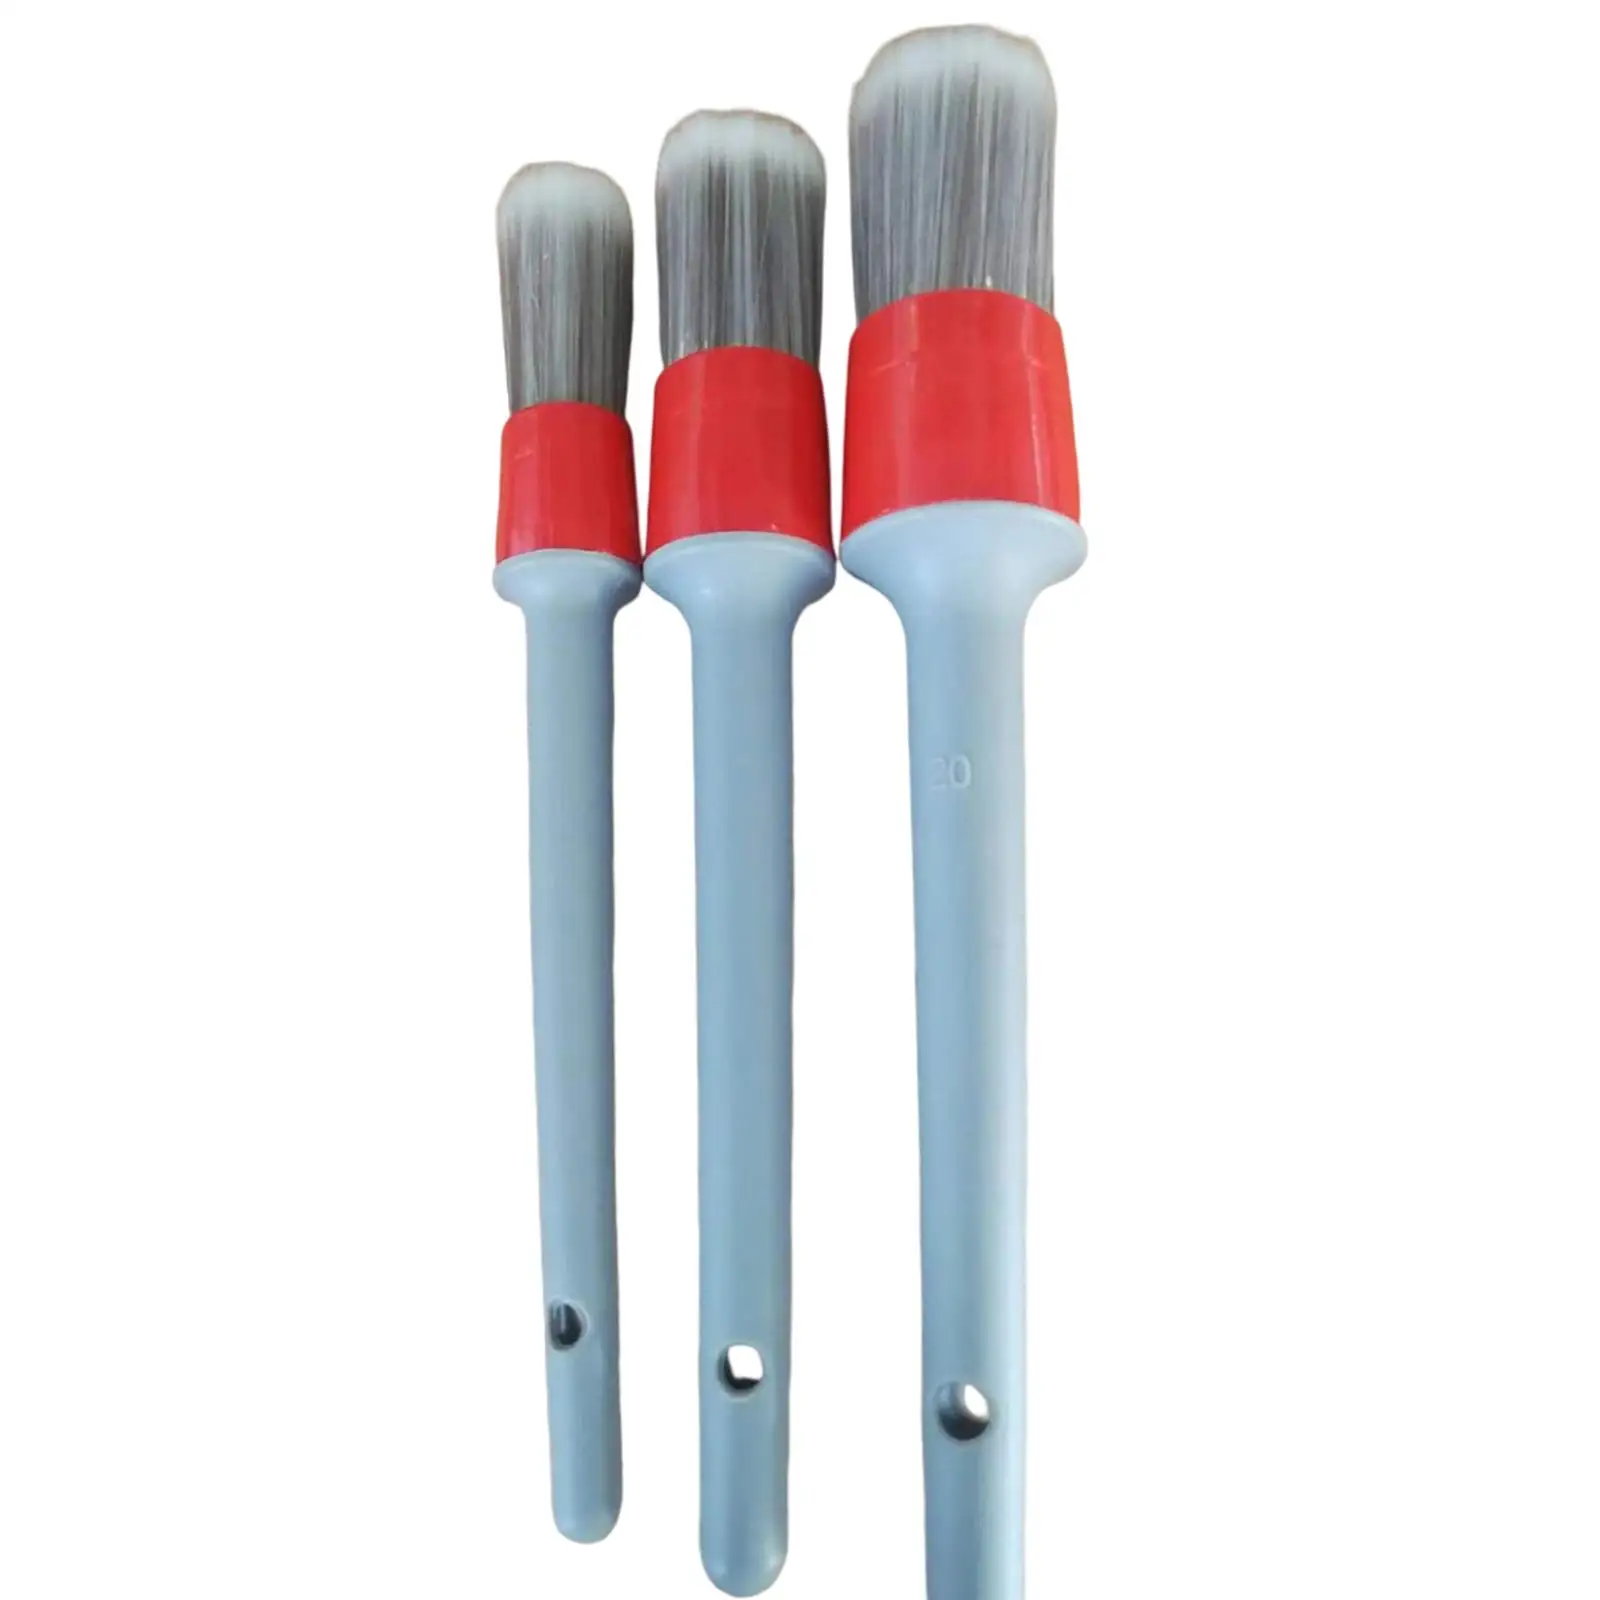 Car Detailing Brushes Set with Handle for Cleaning Interior Wheel